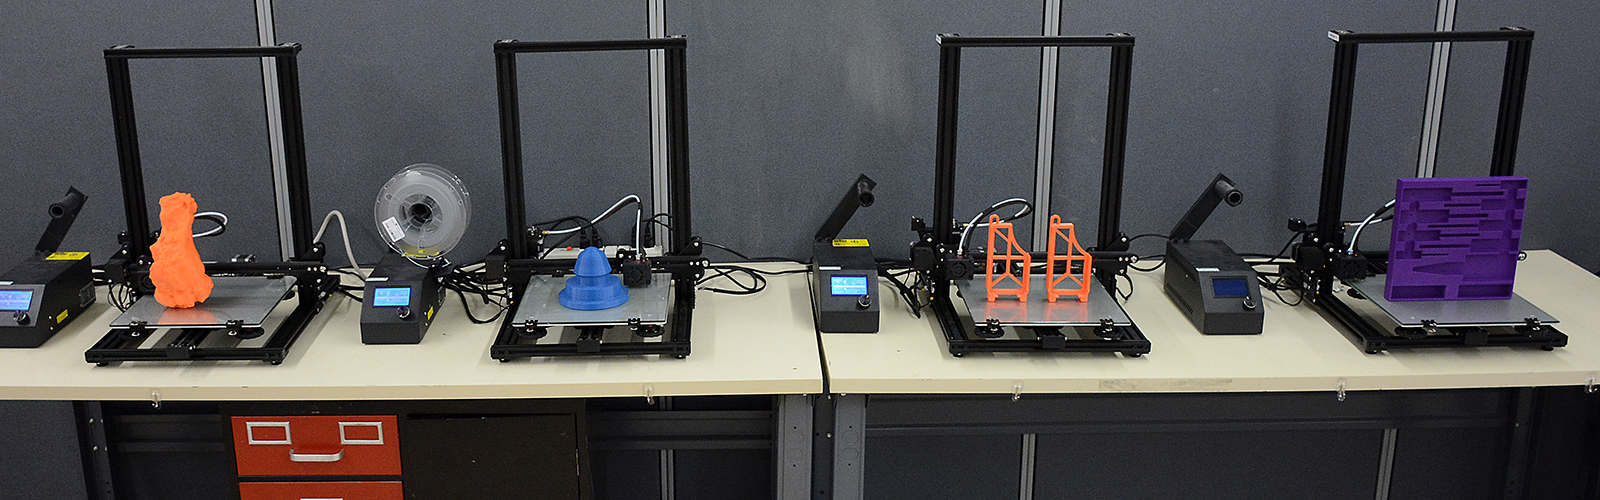 Innosek’s 3D printers churn out products including industrial cell phone holders, toy trucks, and large plastic chicken wings for area businesses. 